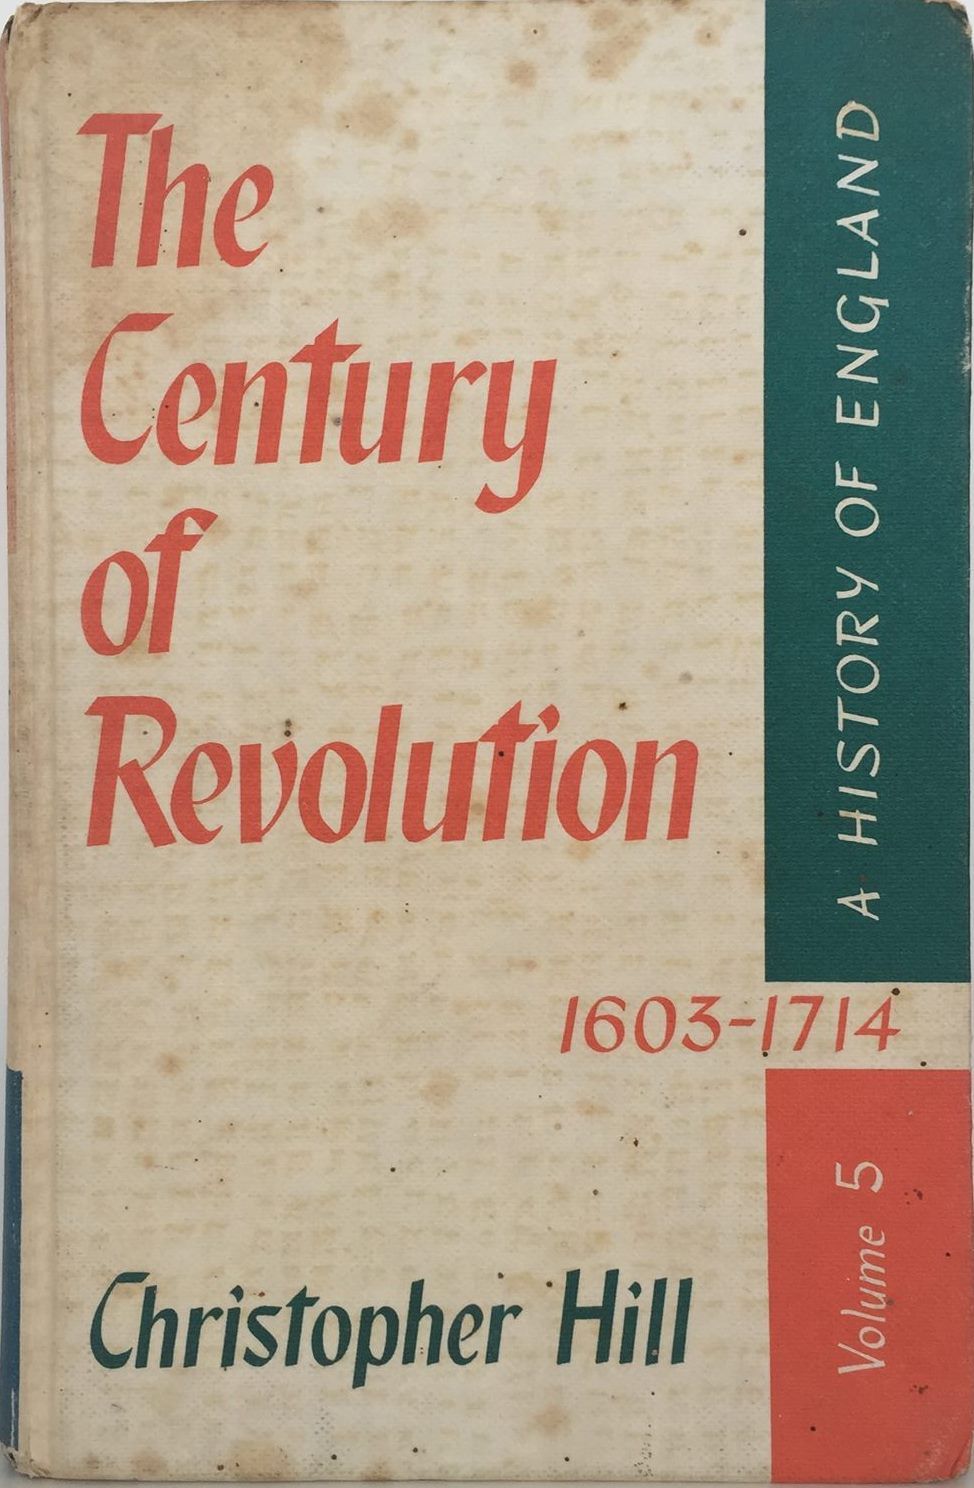 THE CENTURY OF REVOLUTION 1603-1714: A History of England